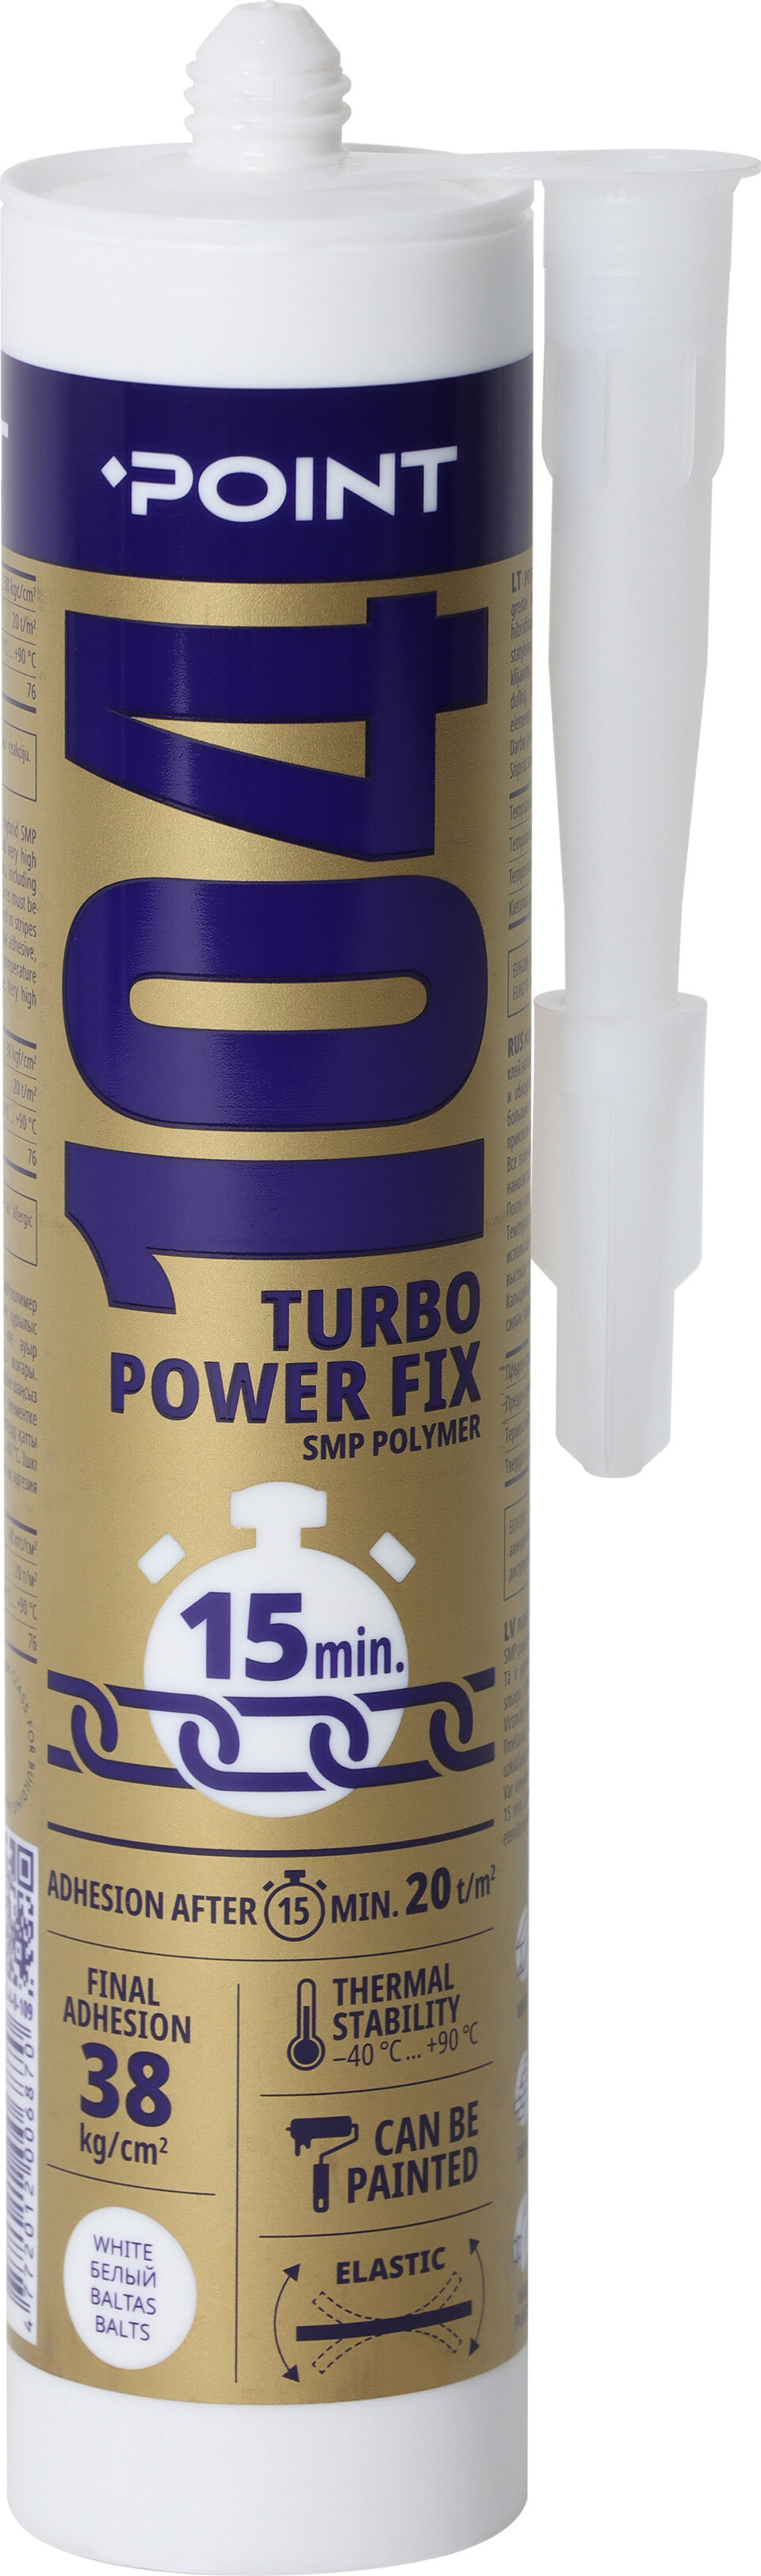 104 TURBO FAST & STRONG FIX extremely fast and strong hybrid adhesive and sealant